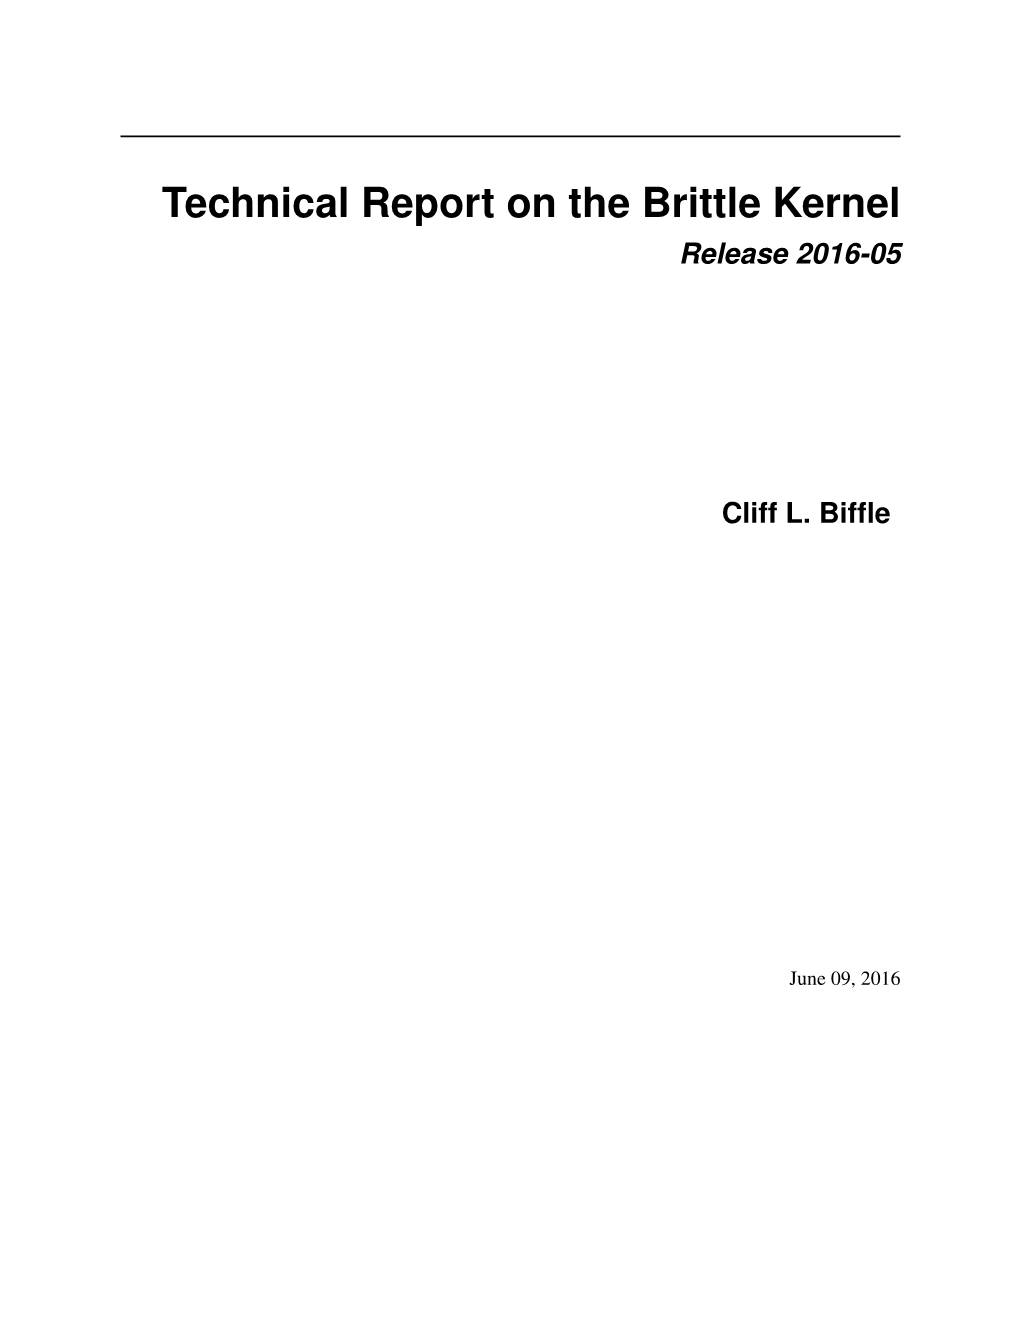 Technical Report on the Brittle Kernel Release 2016-05